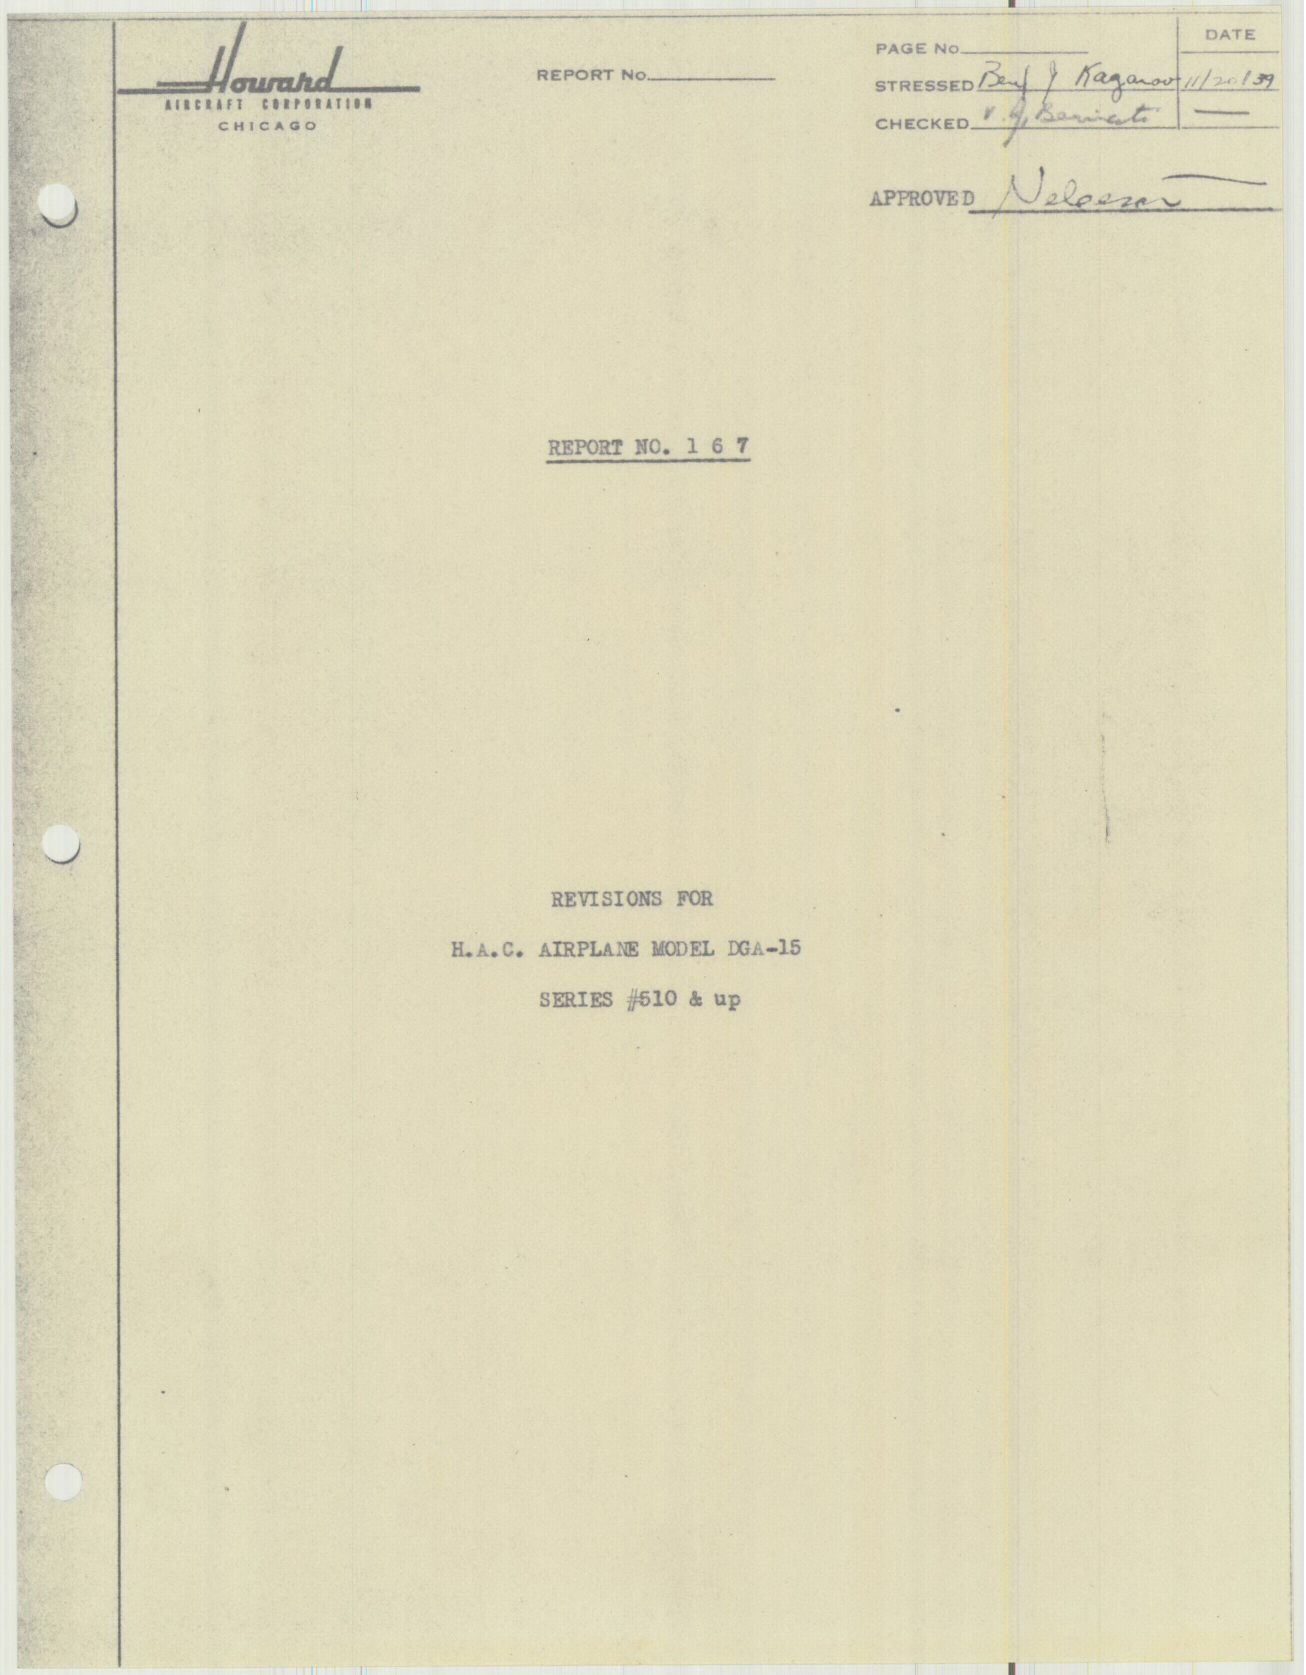 Sample page 2 from AirCorps Library document: Report 167, Revisions for DGA-15, Serial 510 and Up